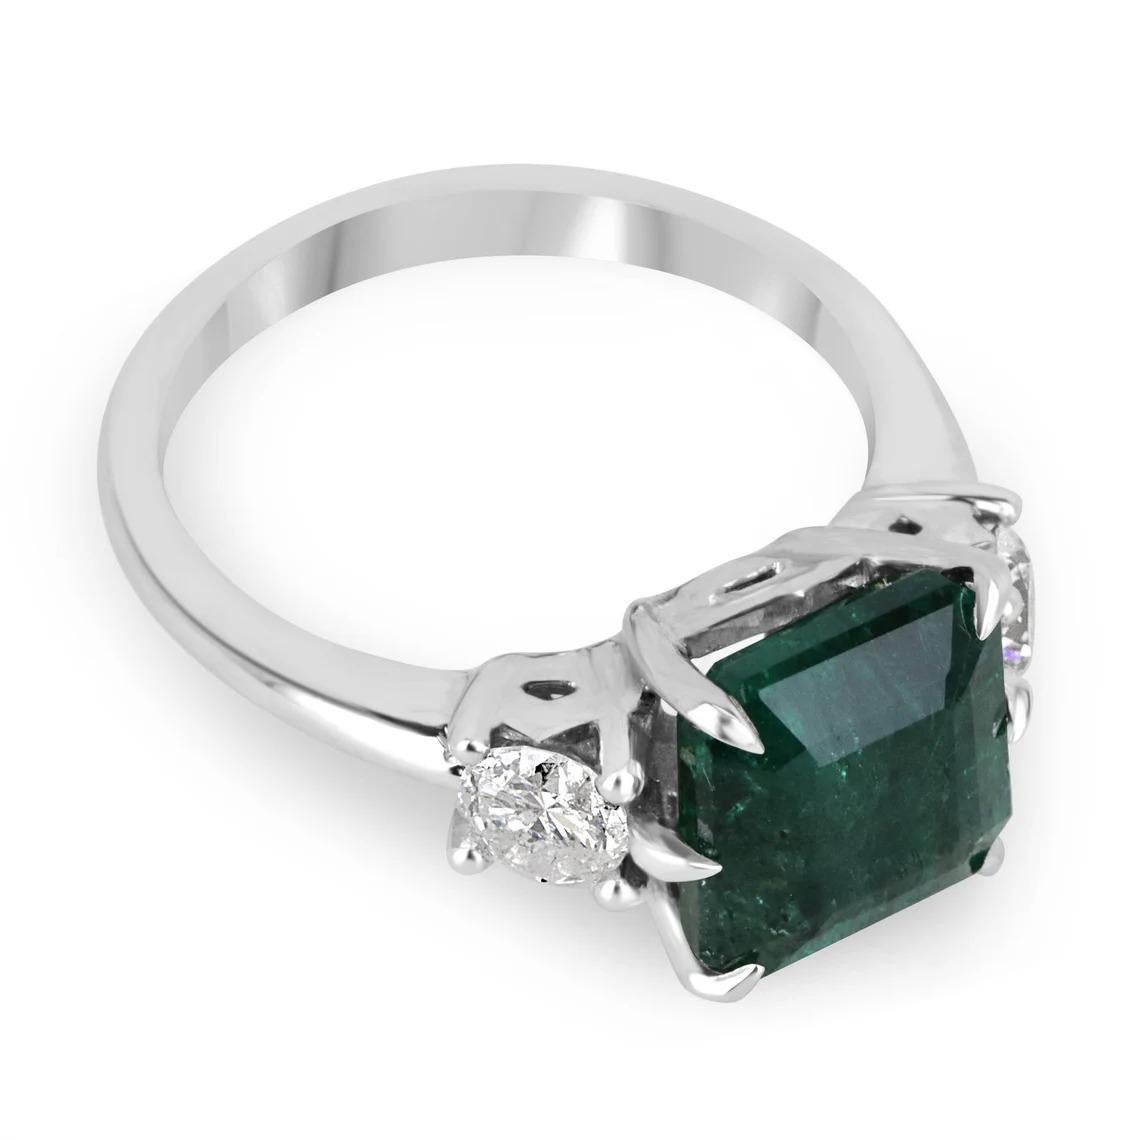 An intensified emerald and diamond three-stone ring. This exquisite piece features a large natural asscher cut emerald, that showcases a ravishing, deep green color with very good luster and clarity. Accenting the center stone are two large